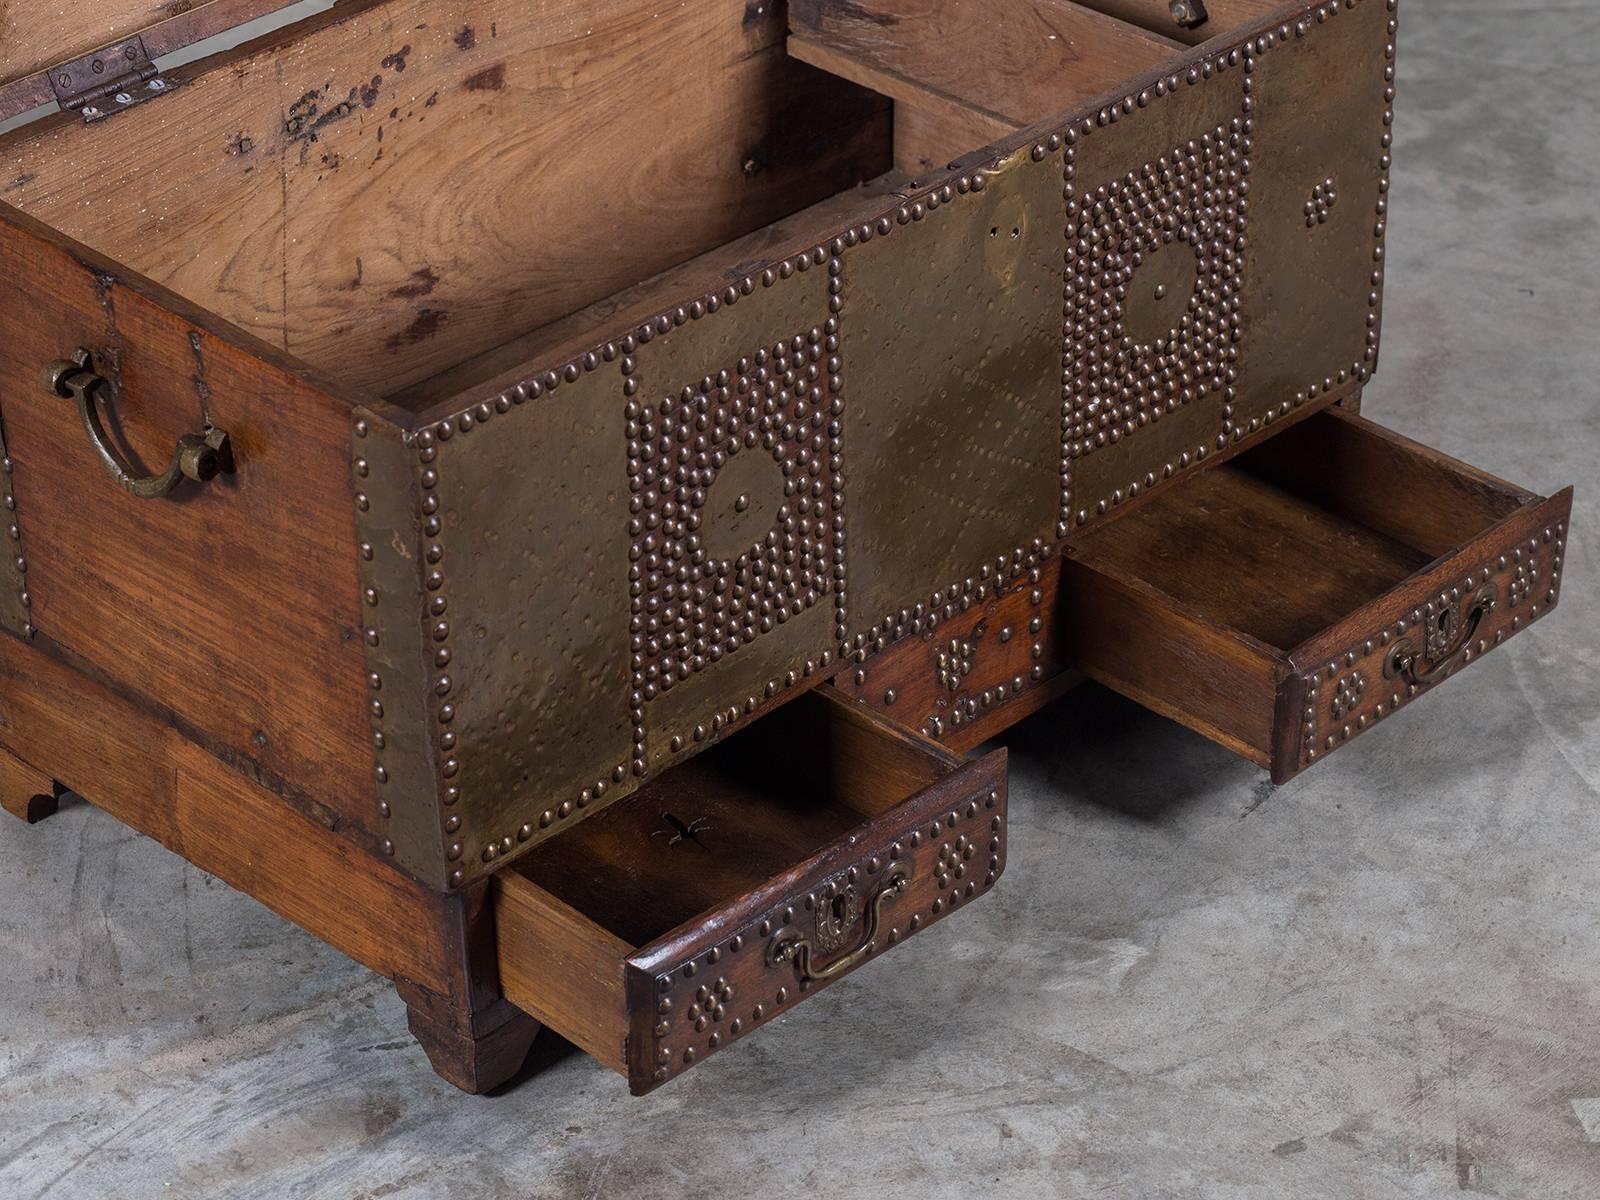 Be the first to see our new arrivals directly through 1stdibs! Please click Follow Dealer below. 

The unique appearance of this African trunk with its hardwood case studded with brilliant brass decoration is known as a Zanzibar trunk, circa 1875.